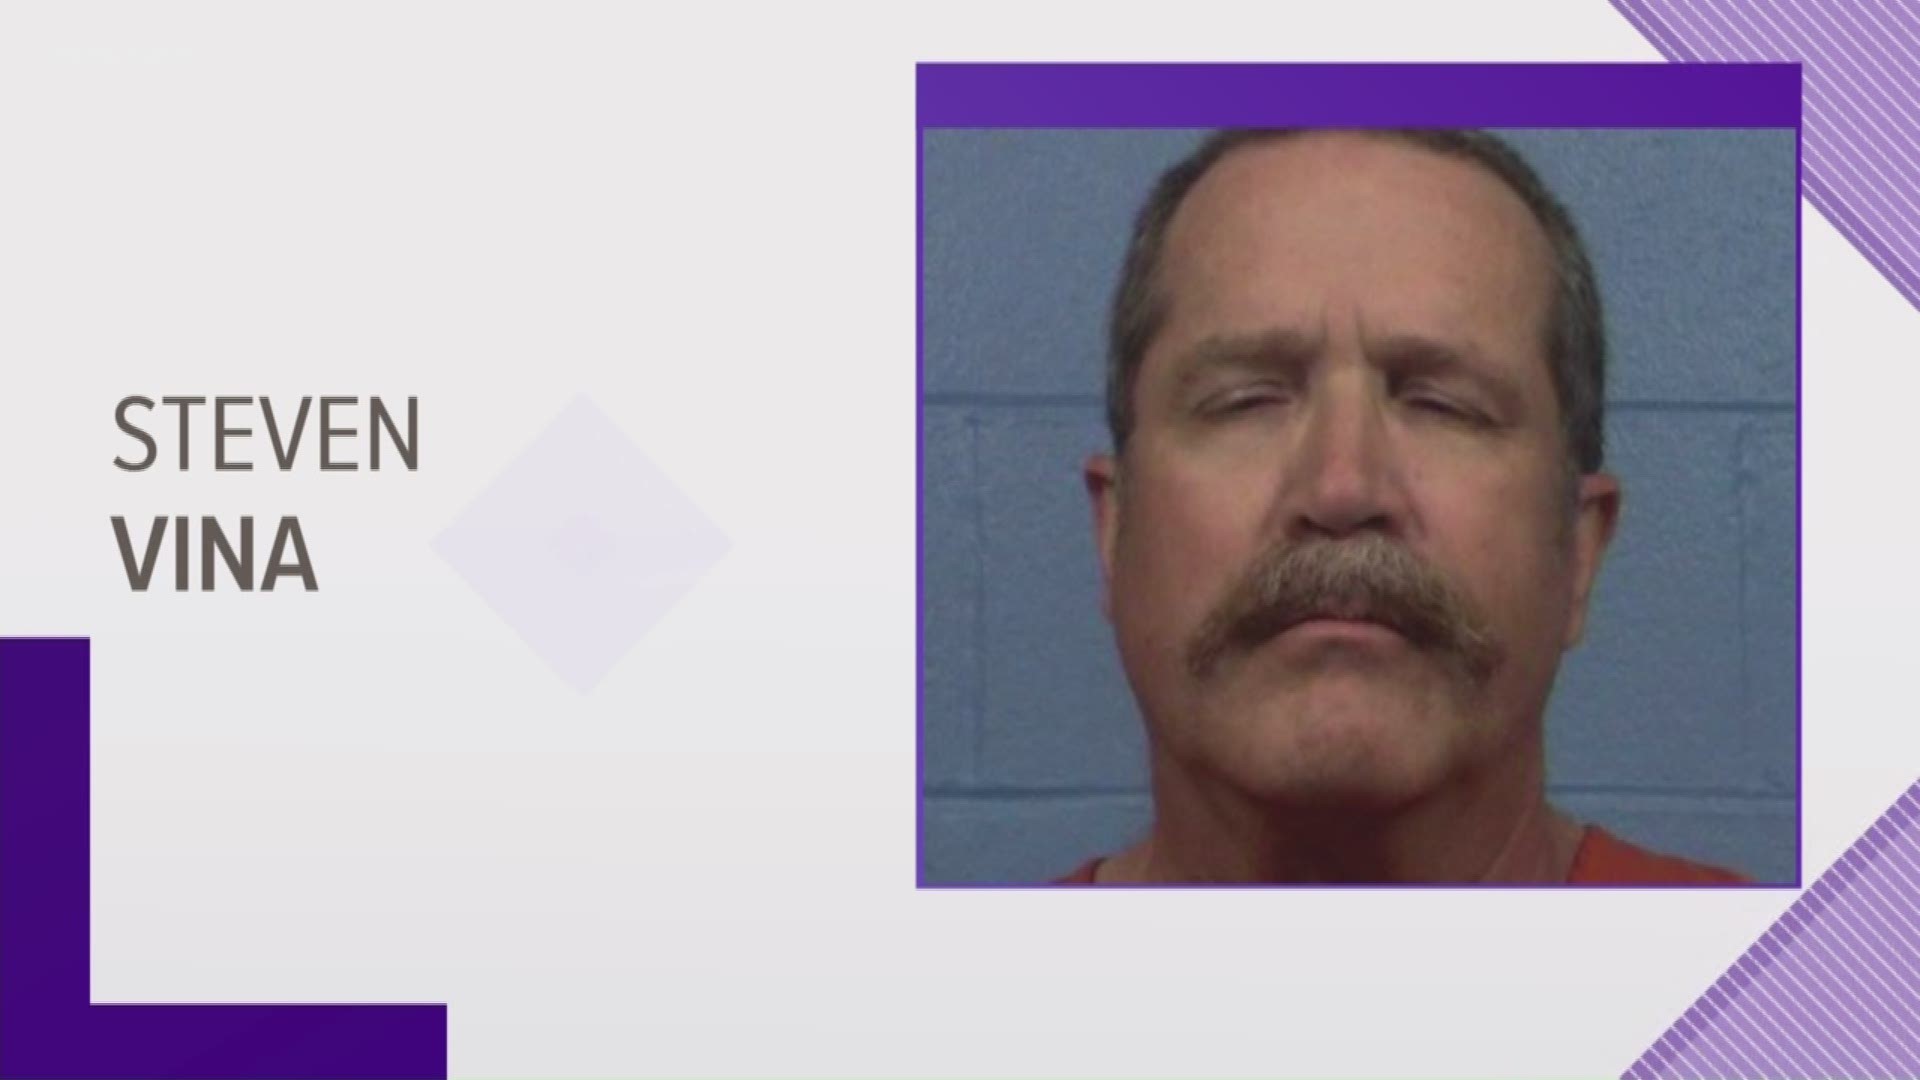 A Houston man is accused of sexually assaulting a boy in the restroom of a Round Rock church.